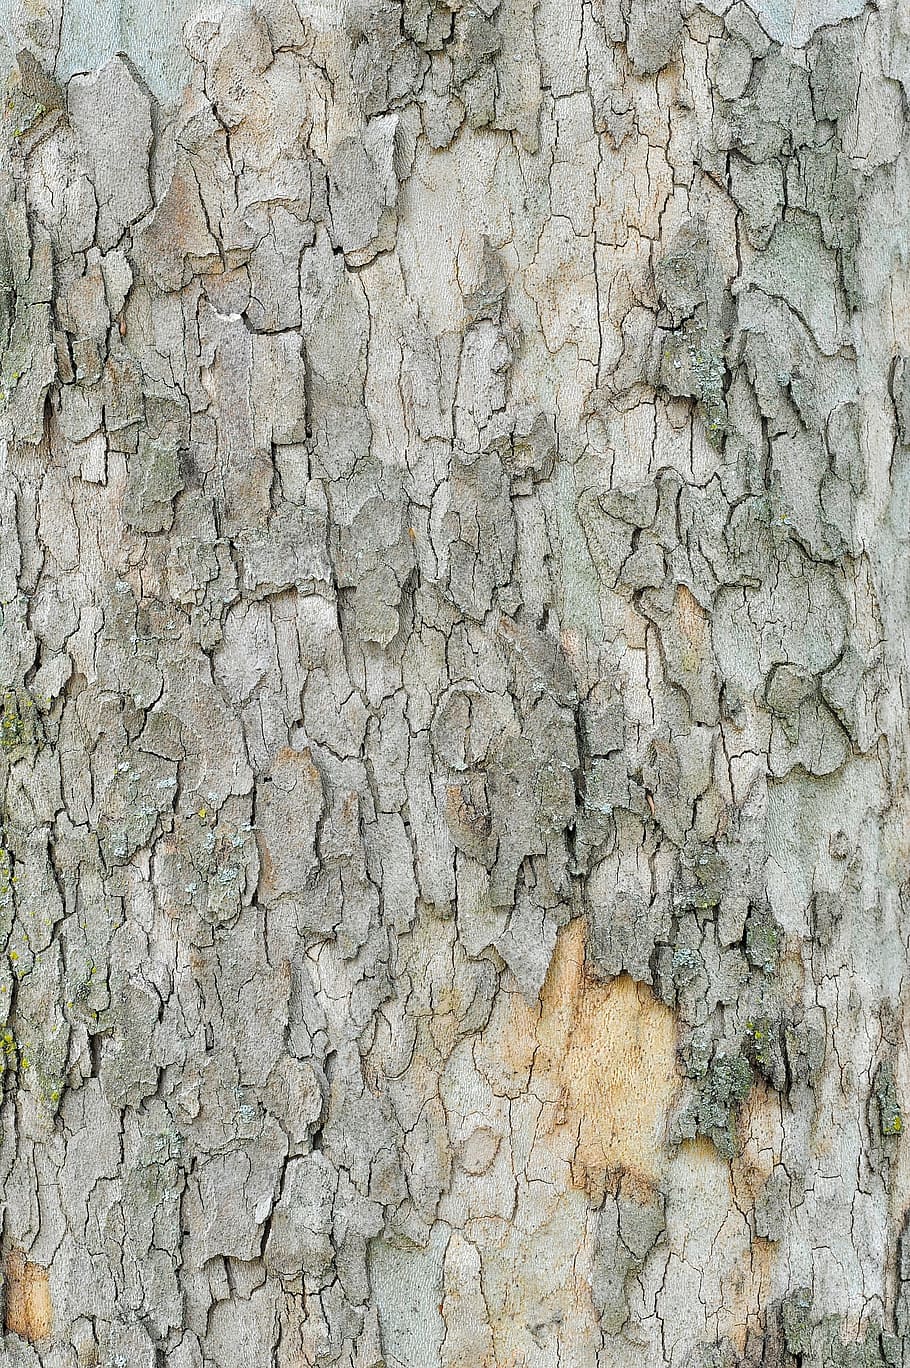 Bark, Tree, Wood, Texture, Plant, Old, green, nature, trunk, backgrounds